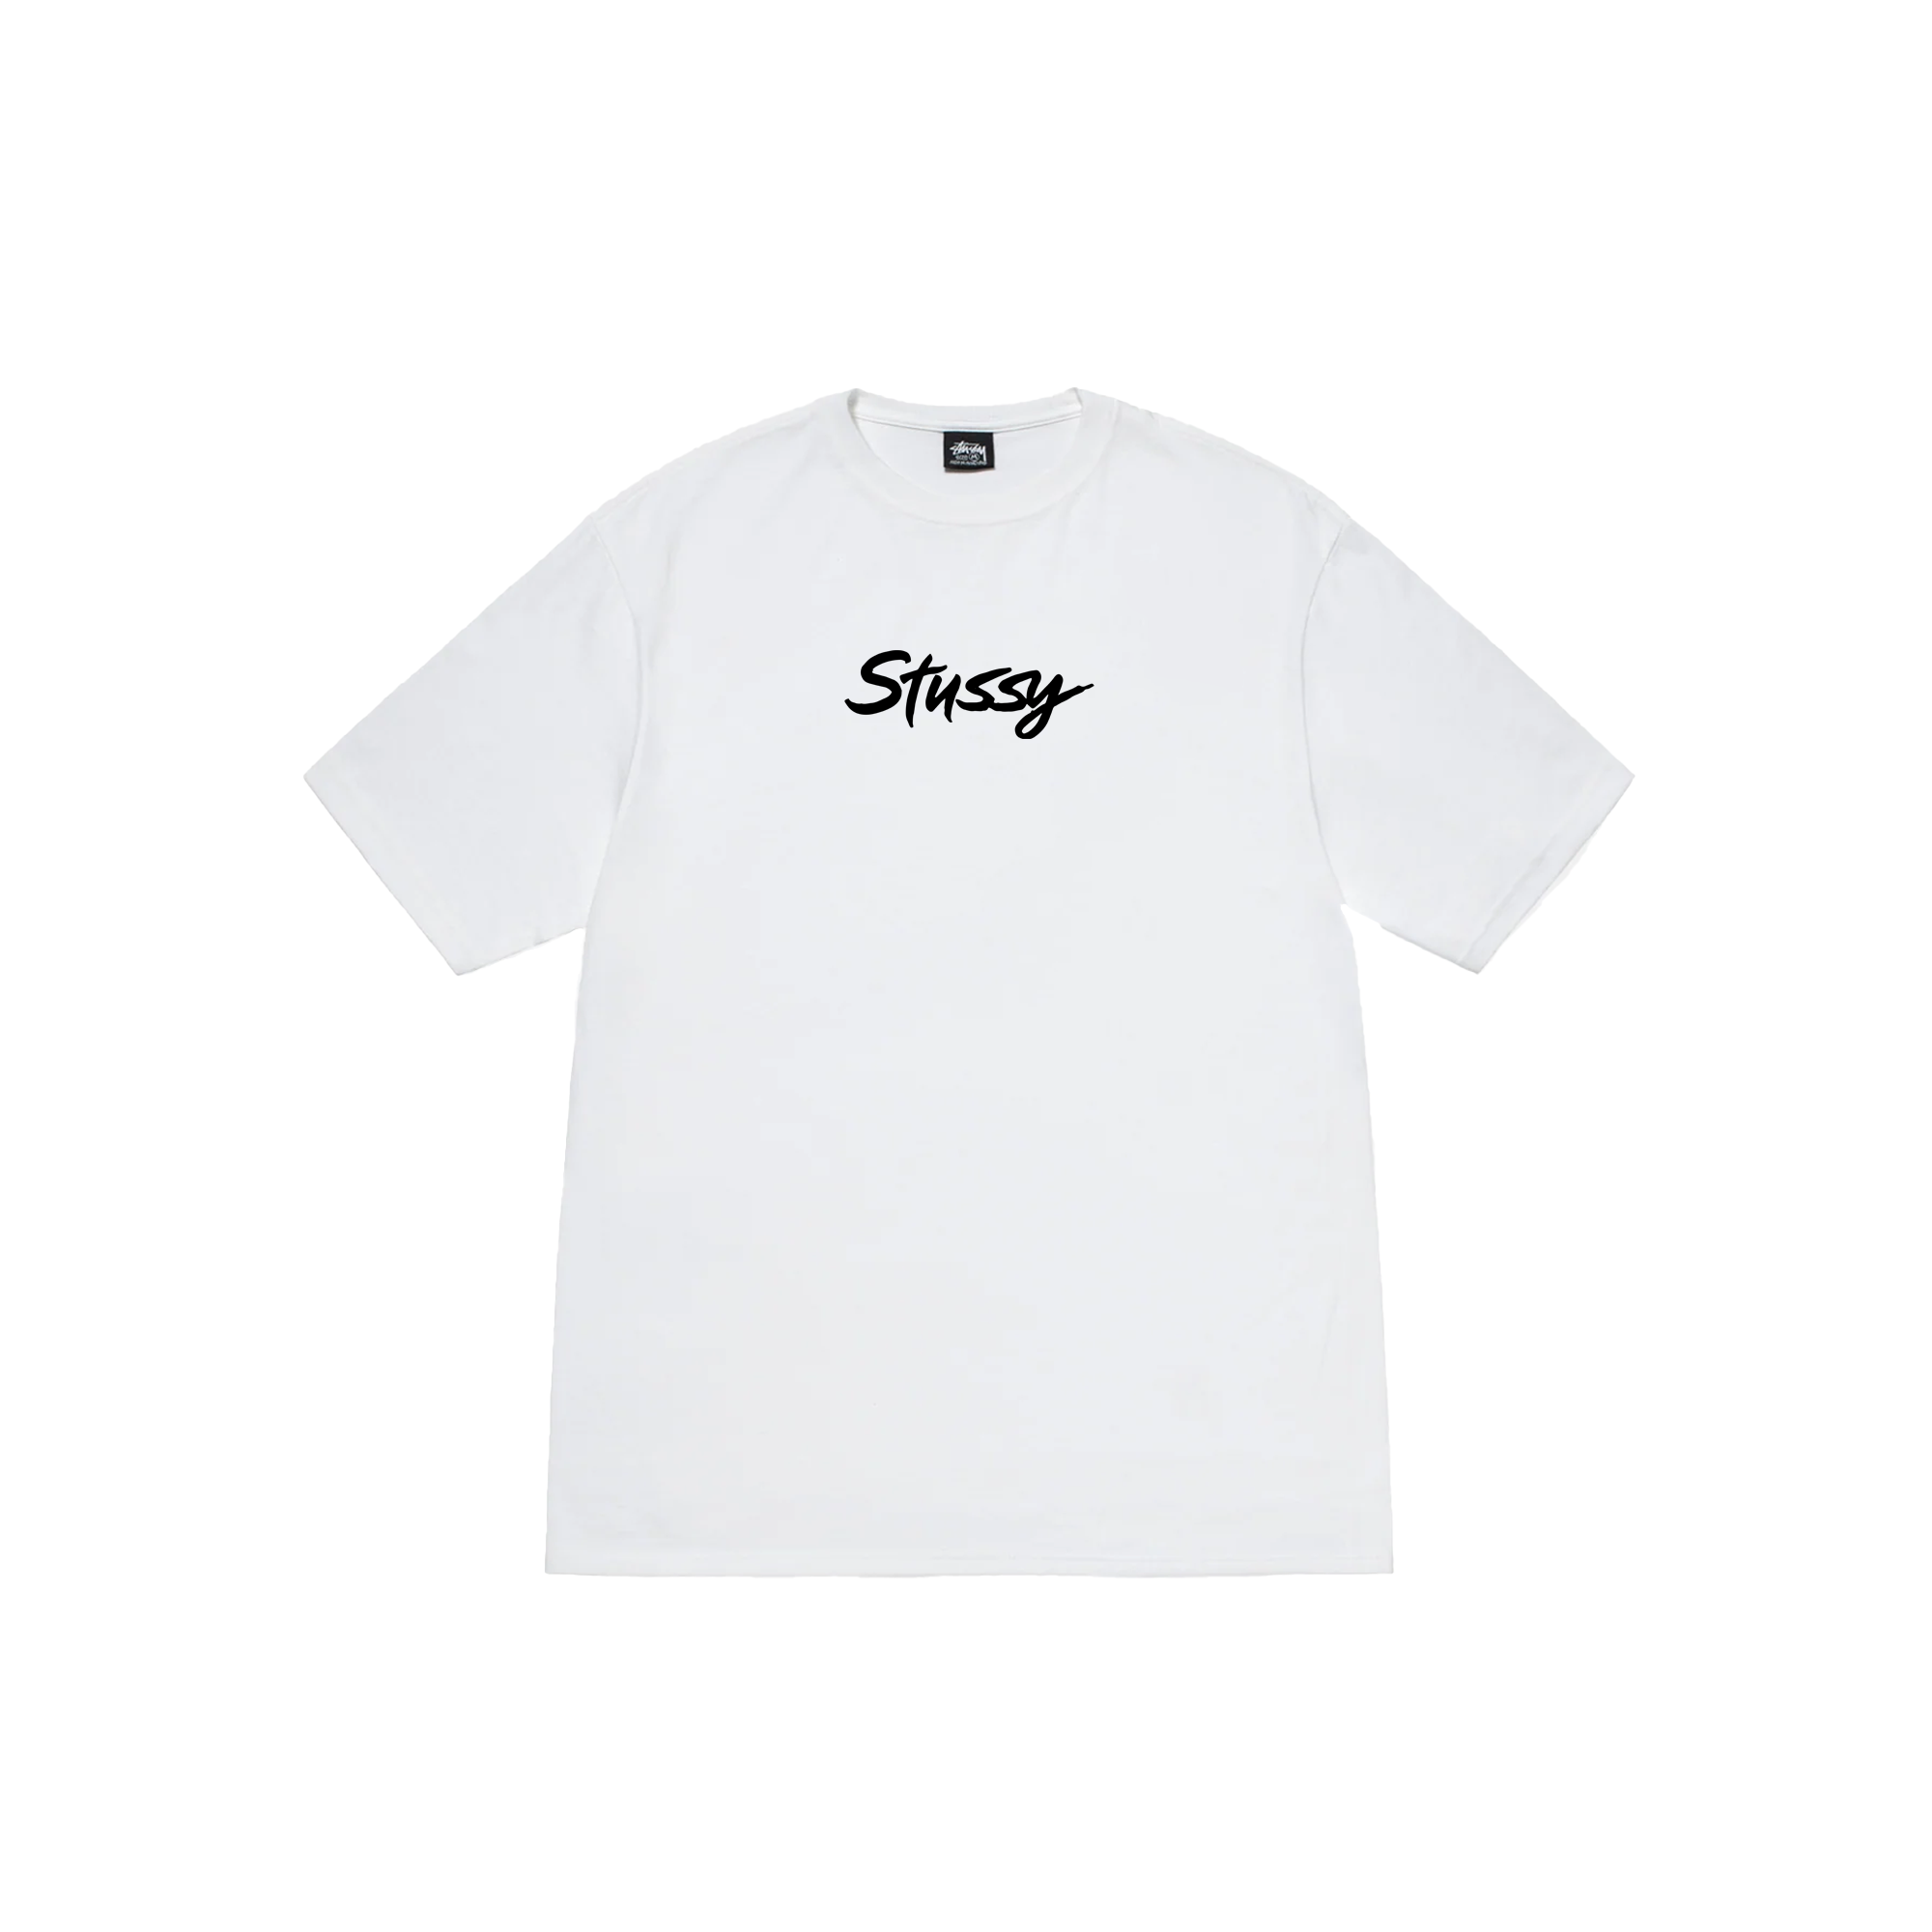 Stussy Floral The Kid 04 T-Shirt